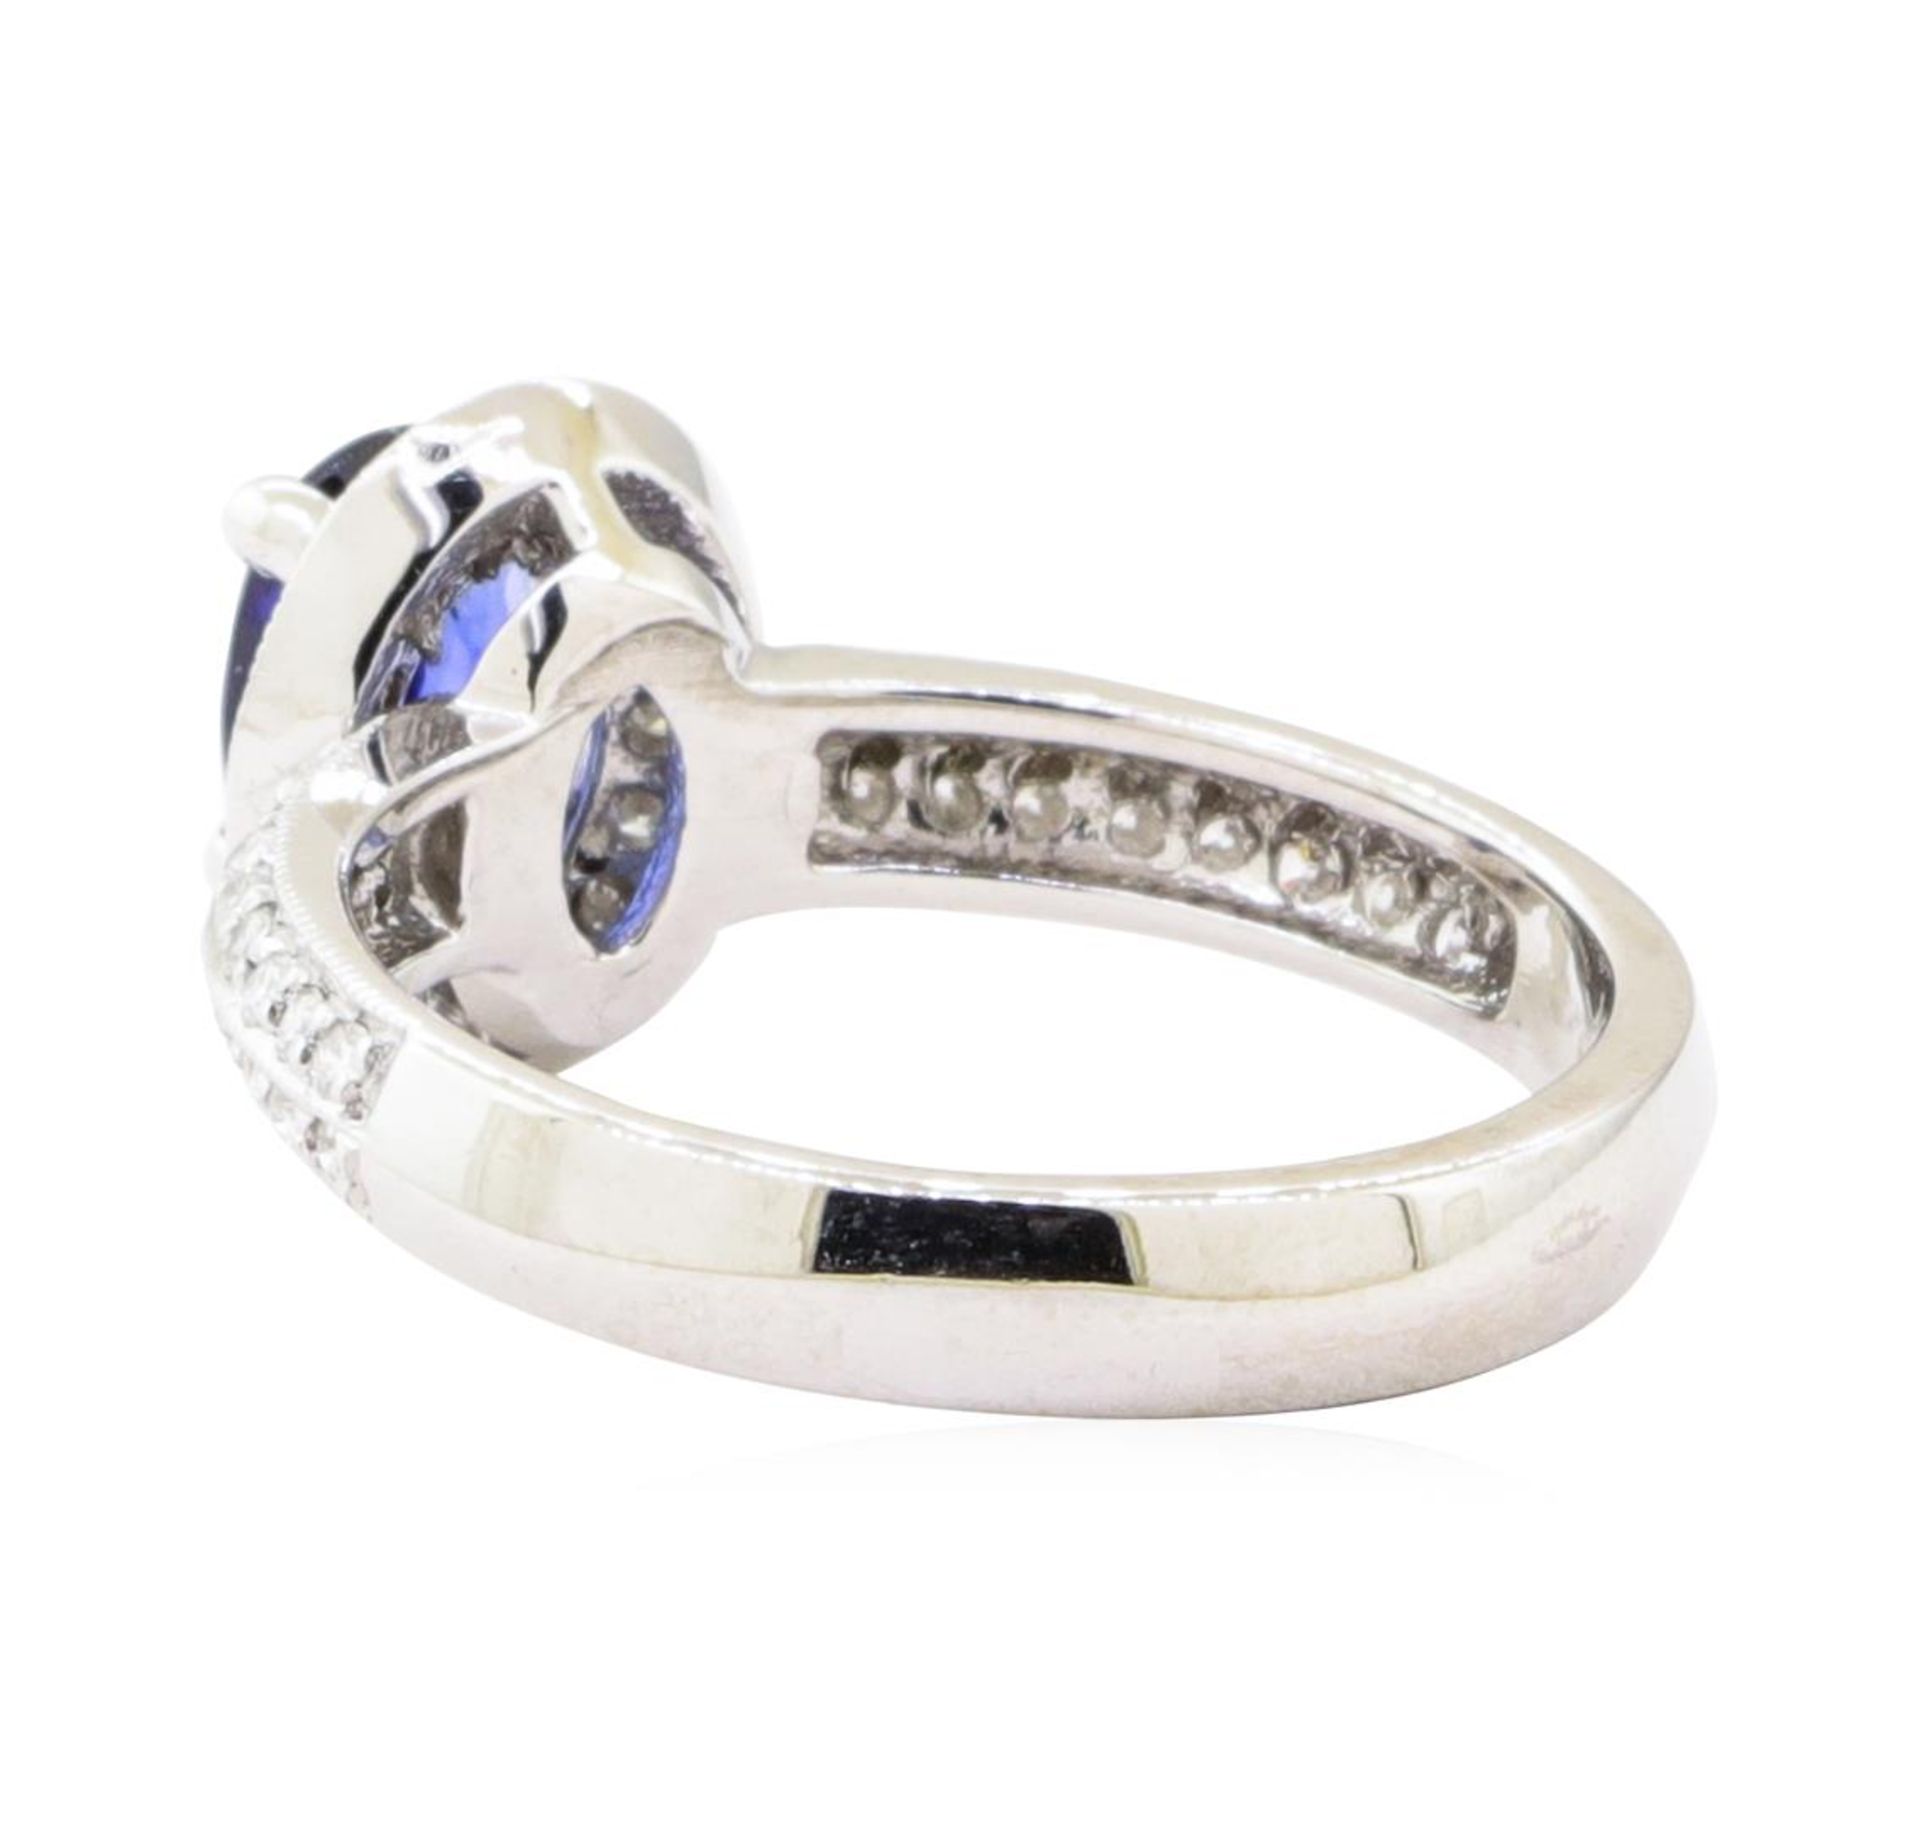 1.35 ctw Sapphire And Diamond Ring - 14KT White Gold - Image 3 of 5